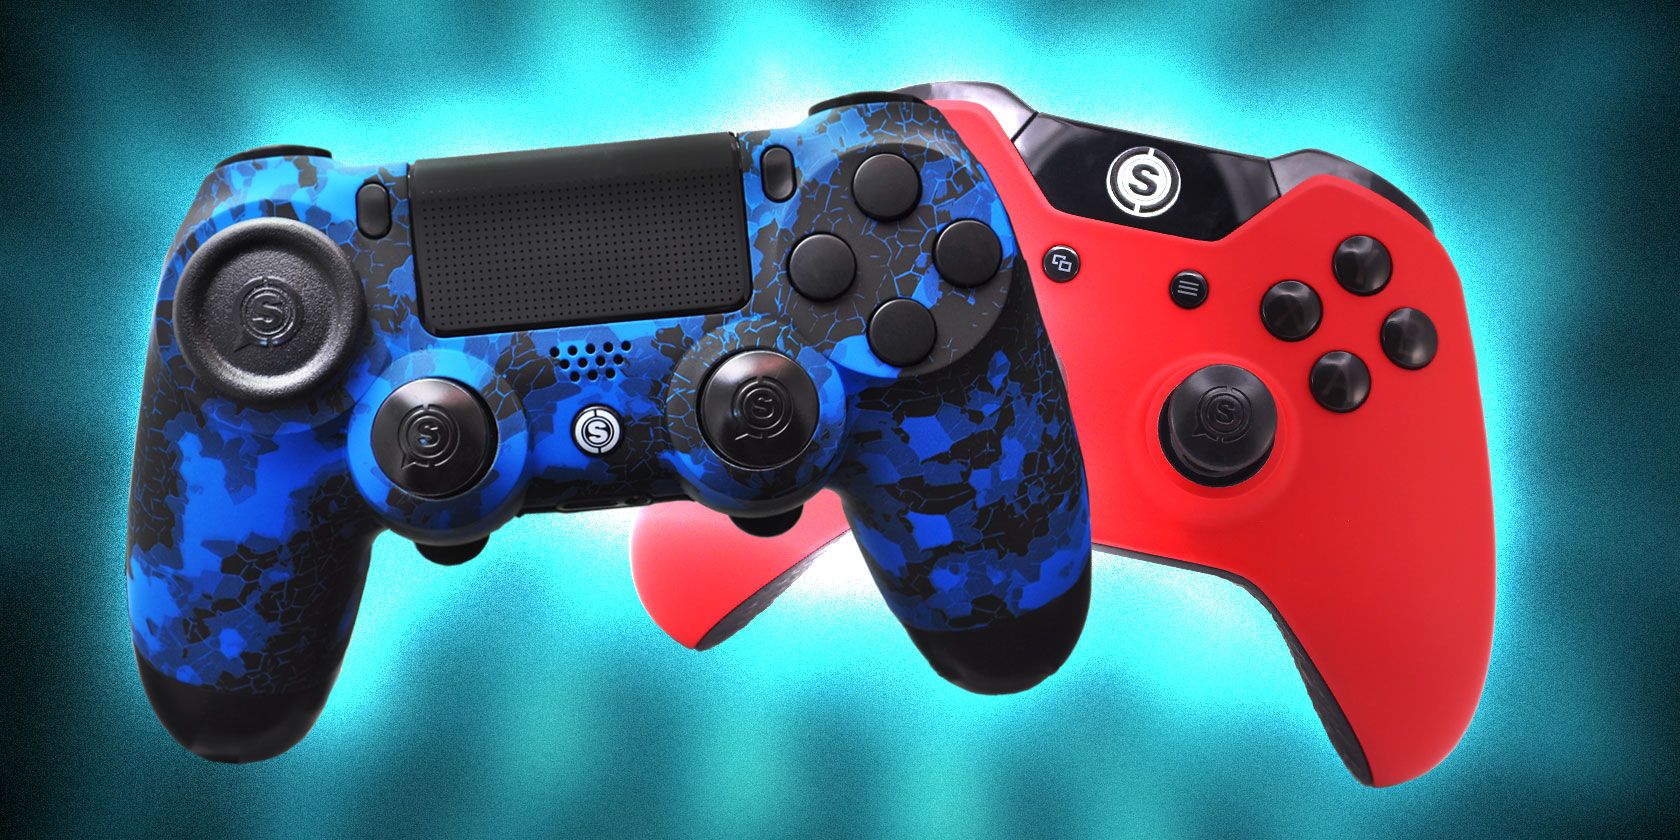 How to Choose a Game Controller for PC?